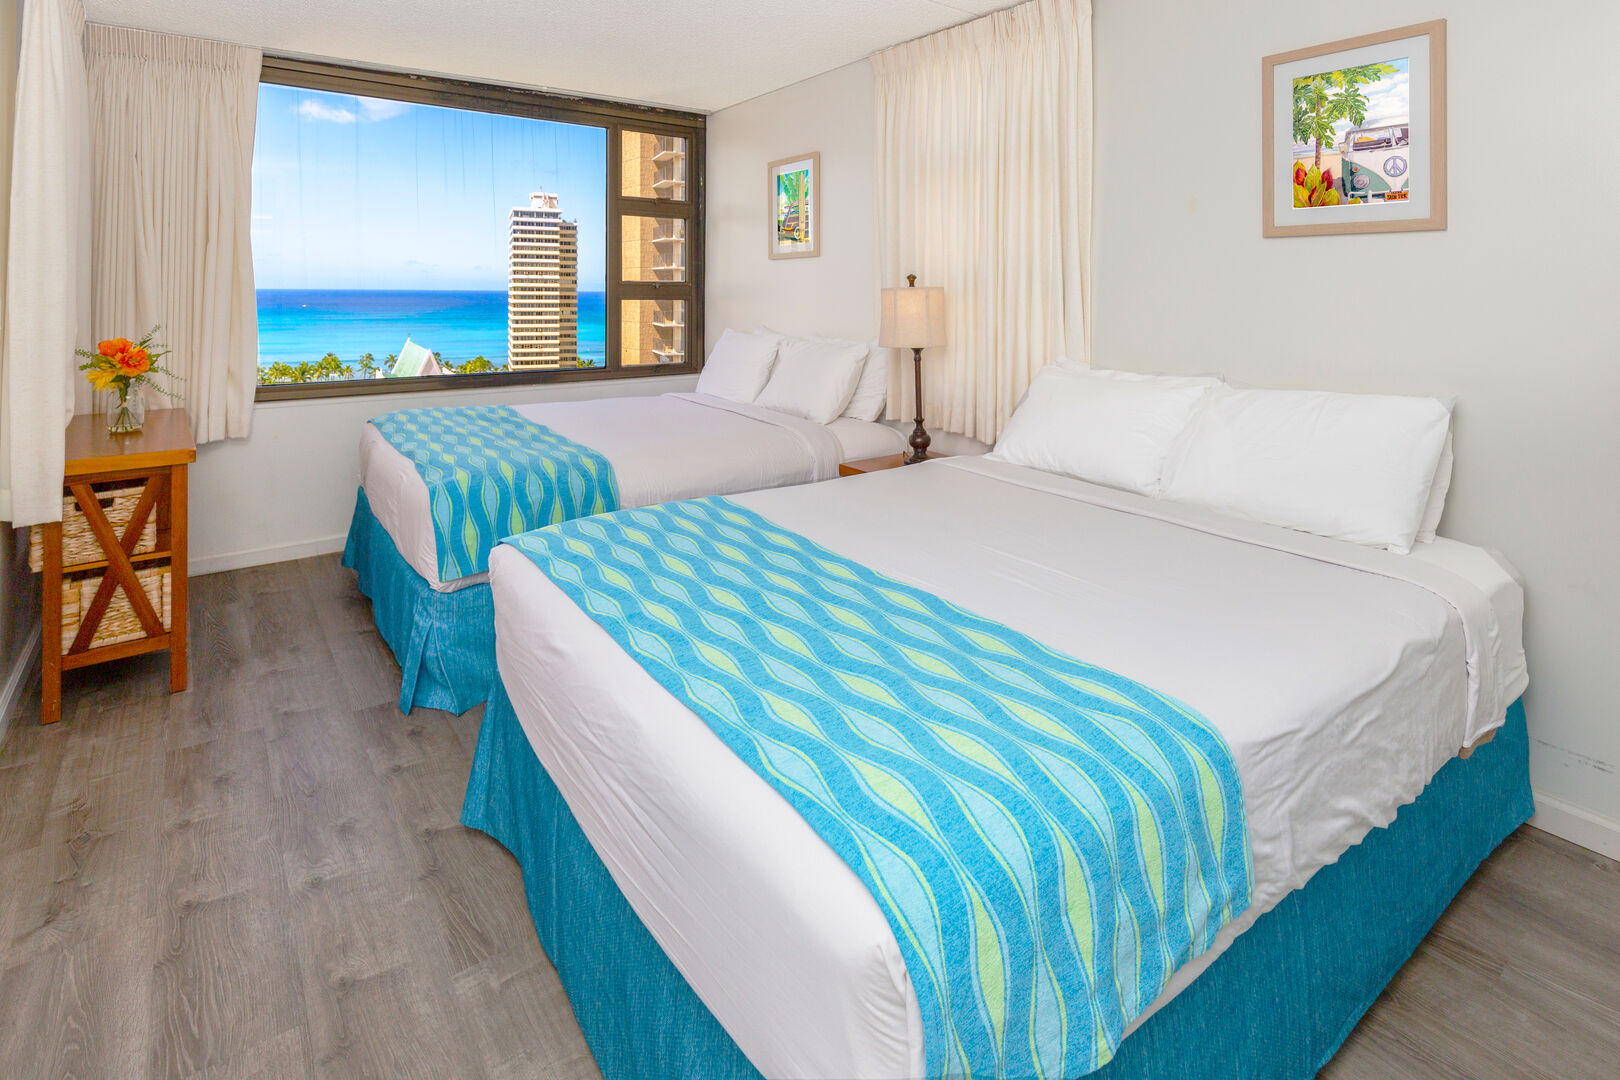 Have a comfortable sleep in your bedroom with two queen-size beds plus a stunning ocean view!